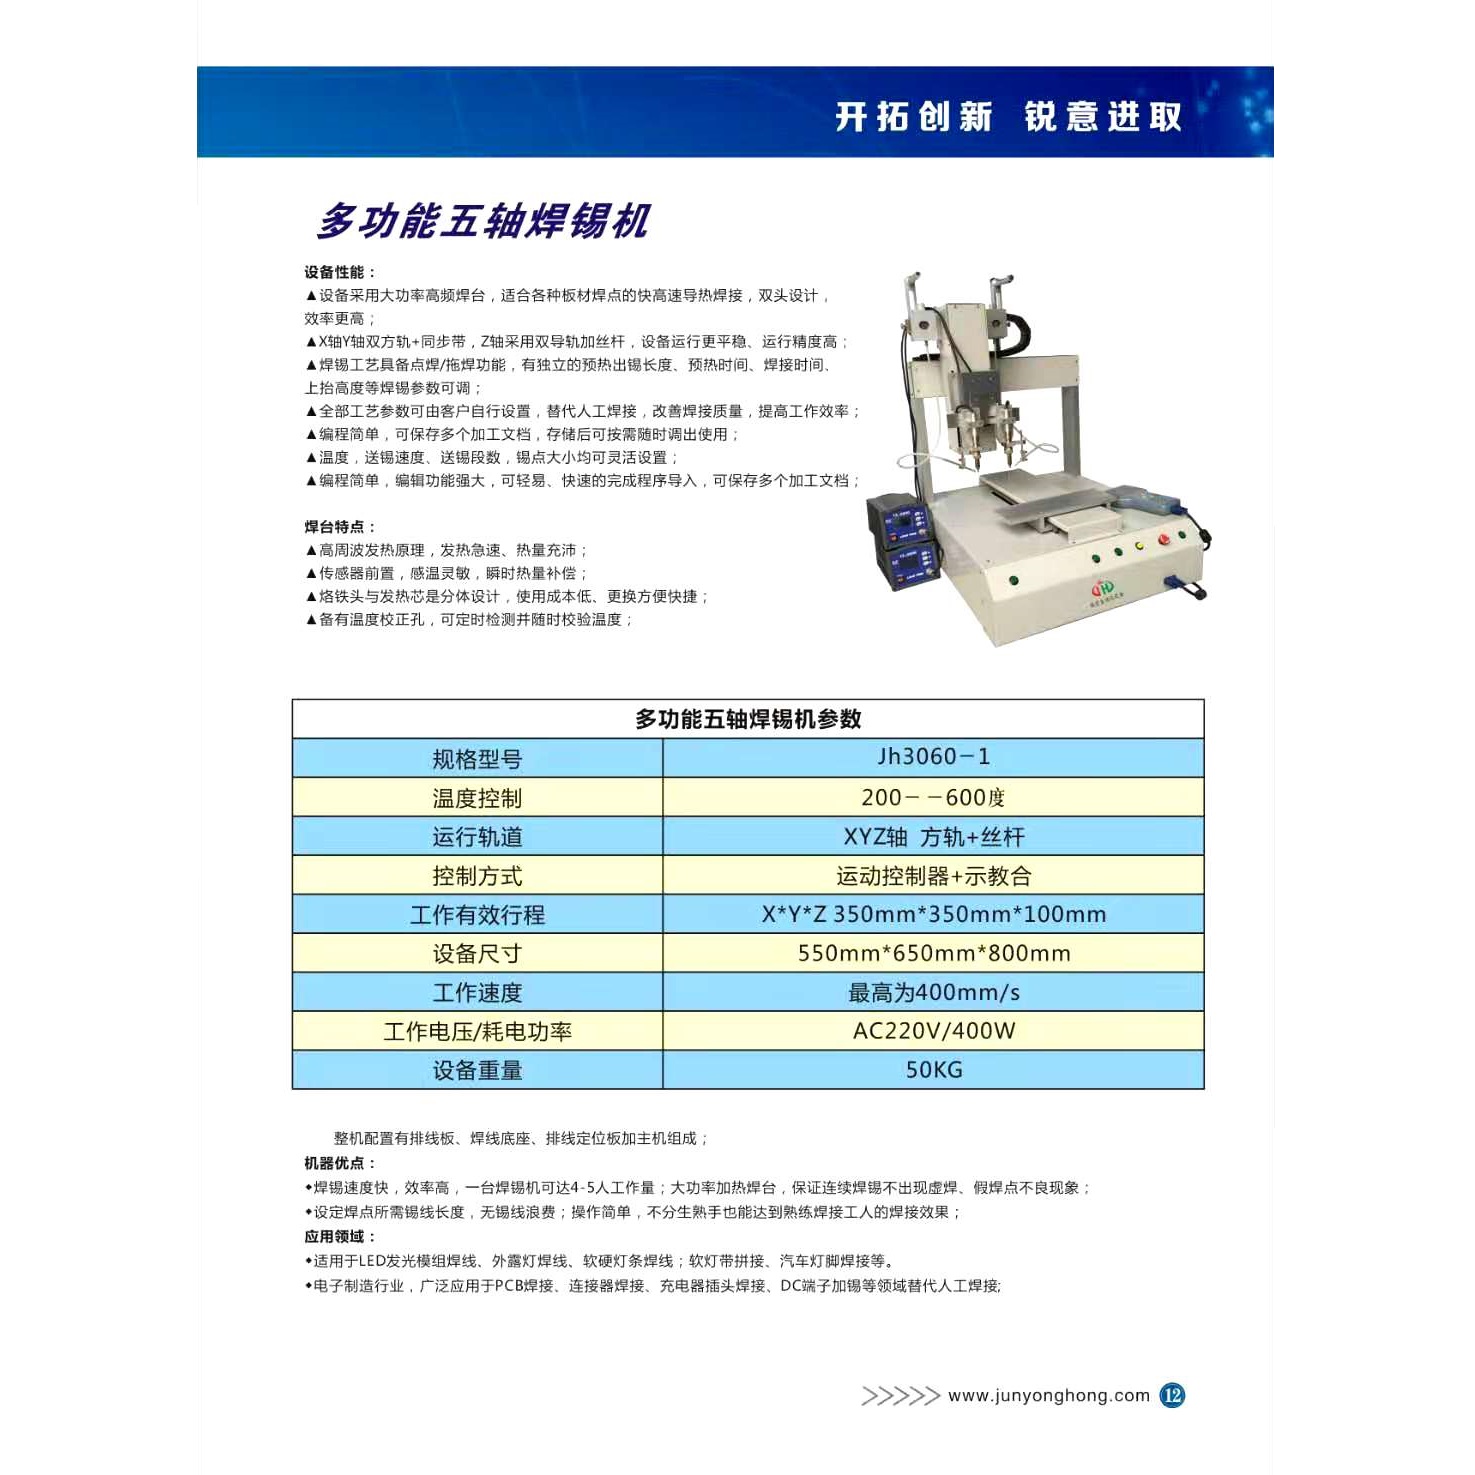 Multi-function five-axis soldering machine